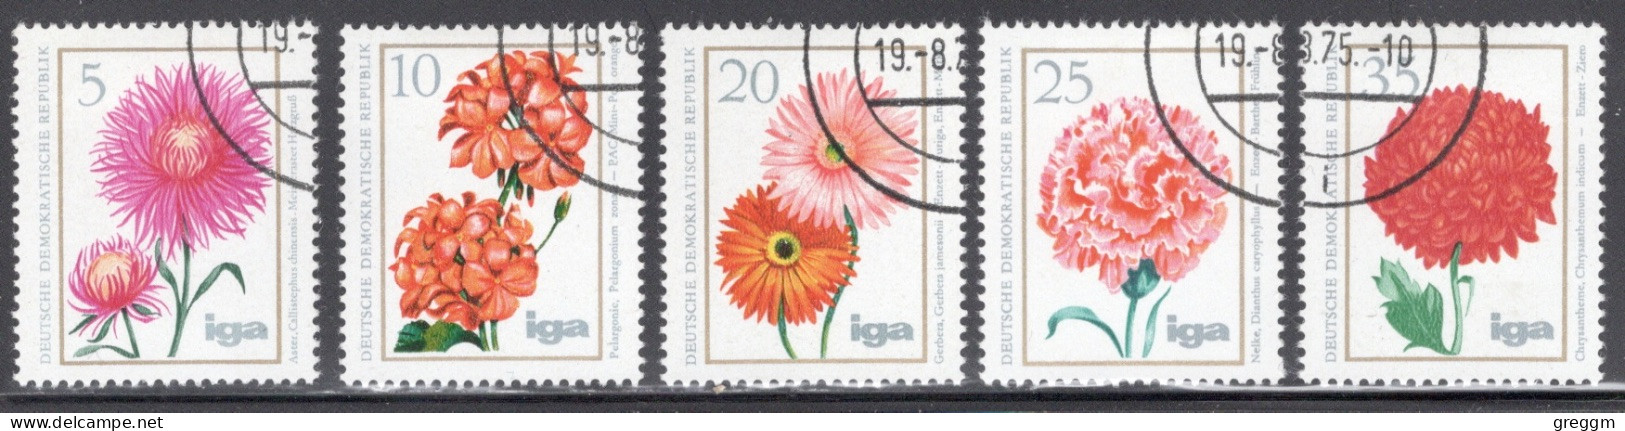 Germany Democratic Republic 1975 Stamps Issued For Flowers In Fine Used - Used Stamps